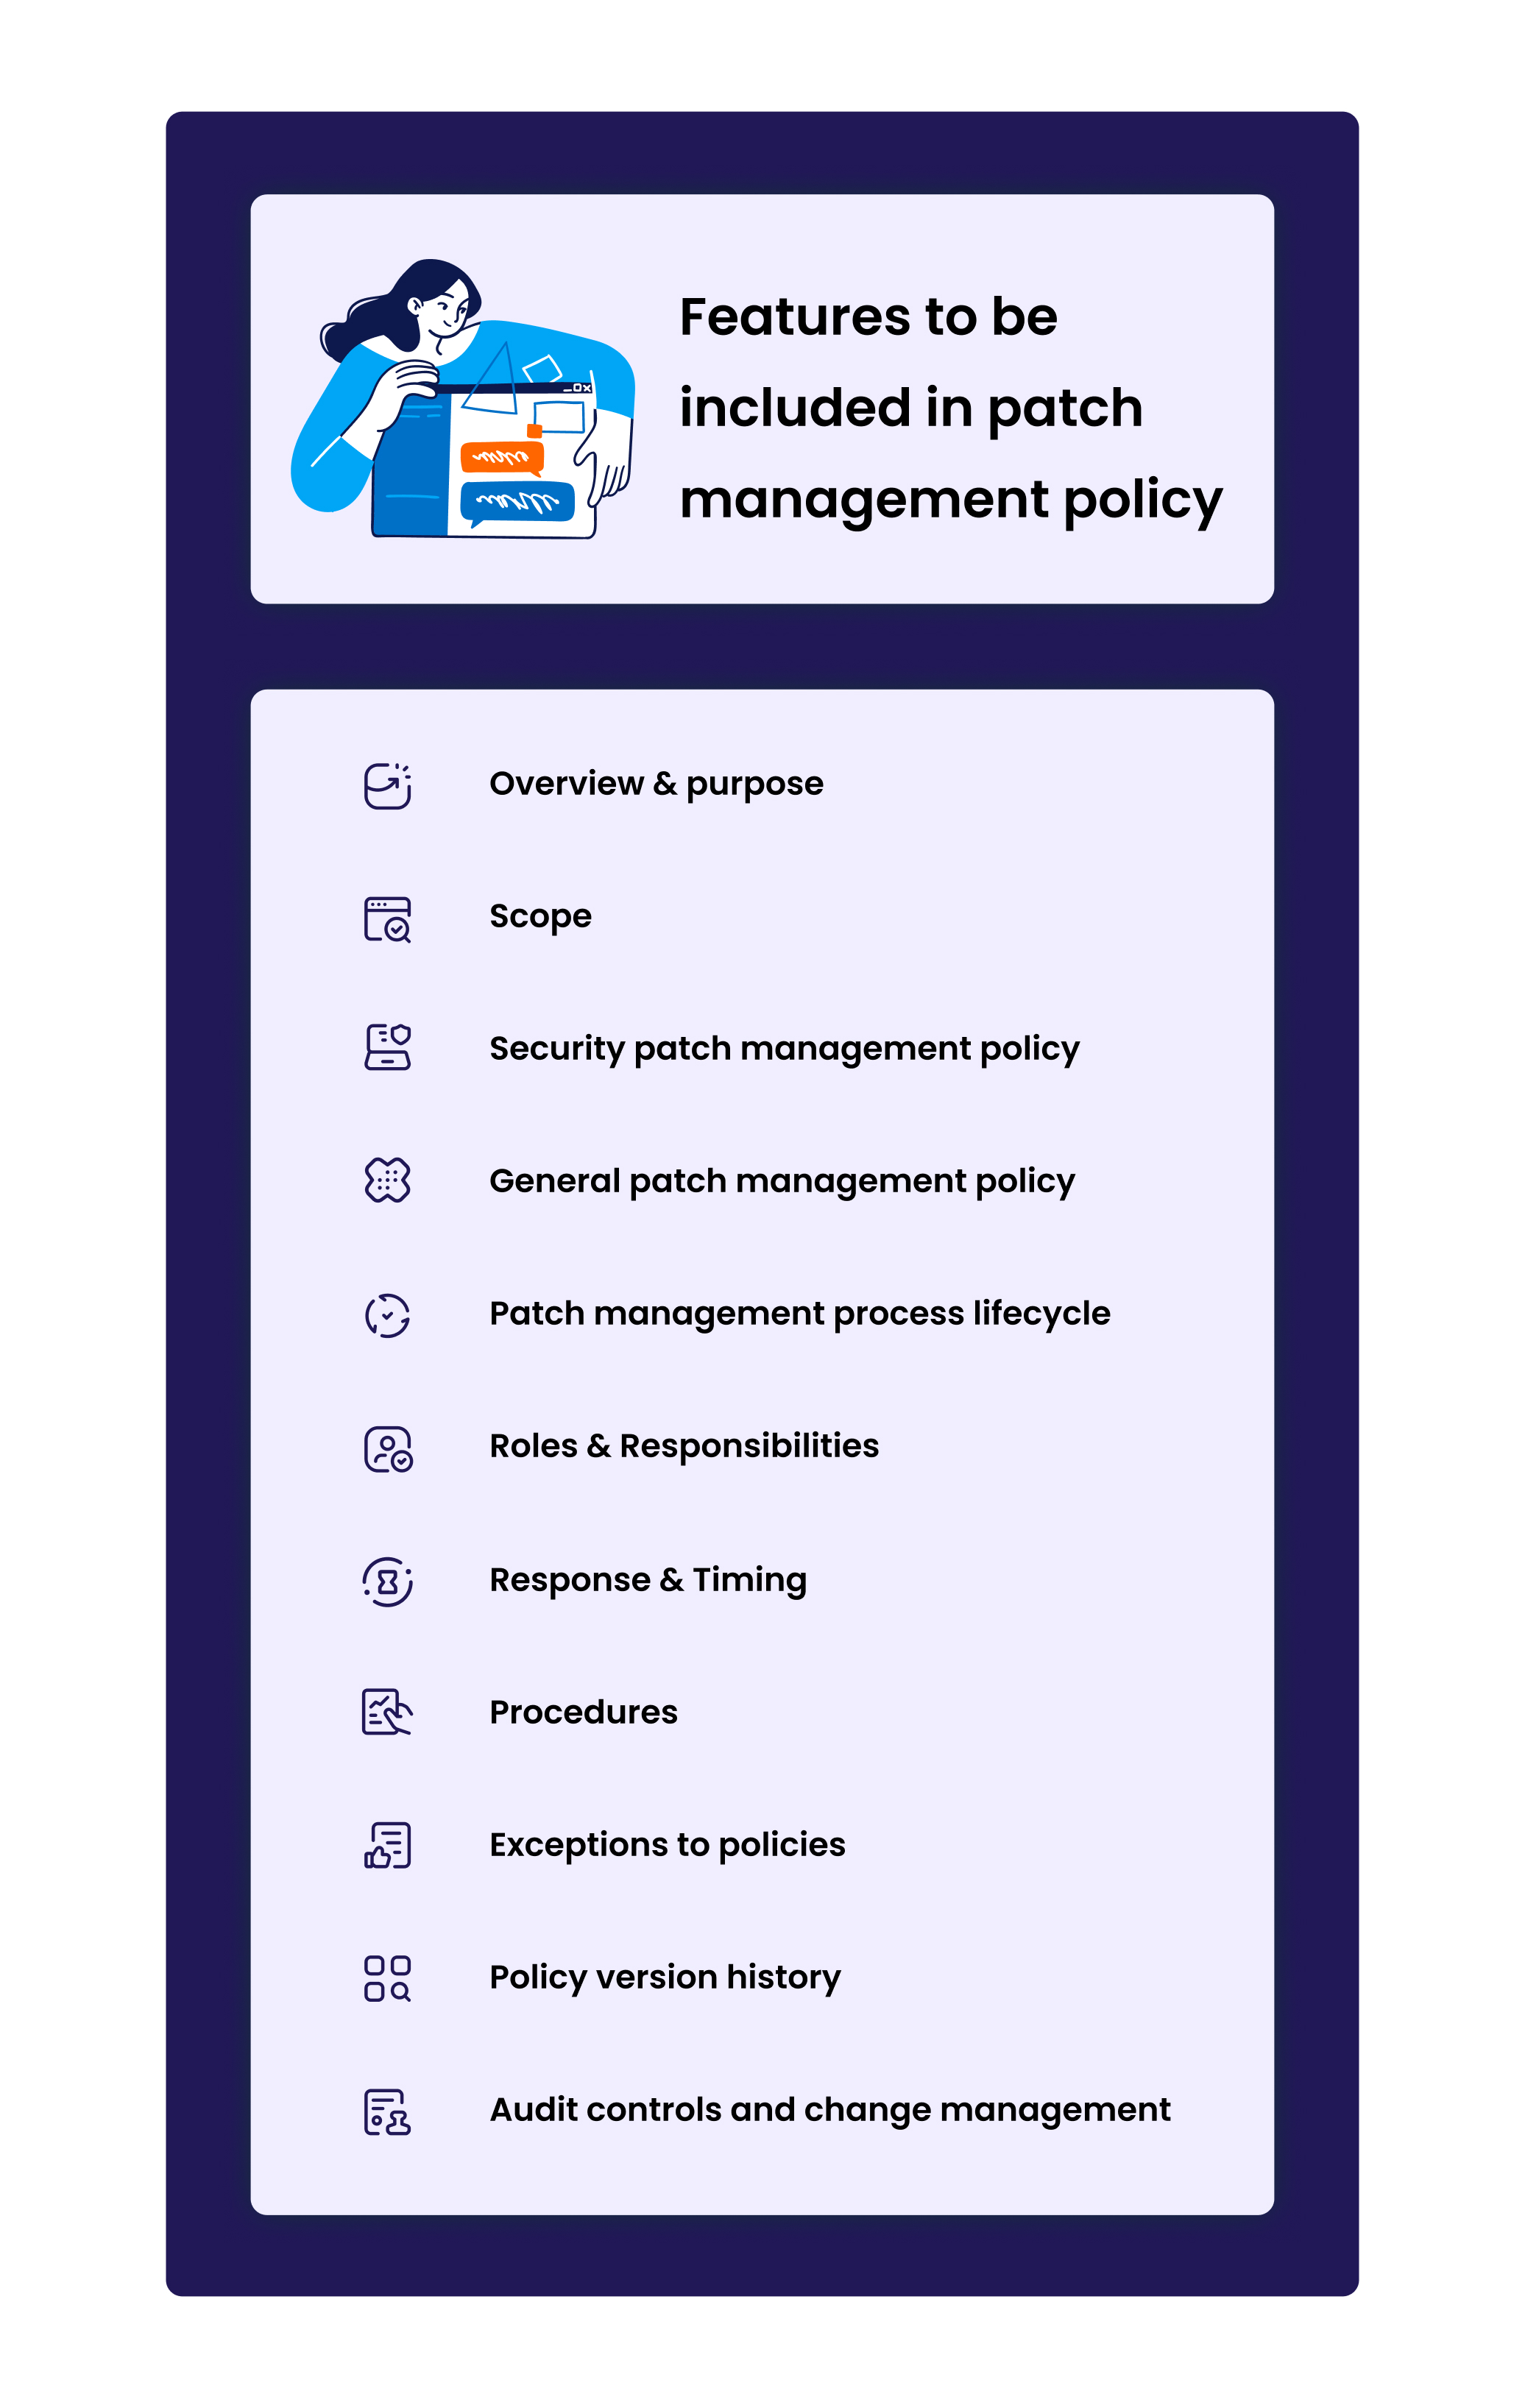 Features to be included in patch management policy.jpg